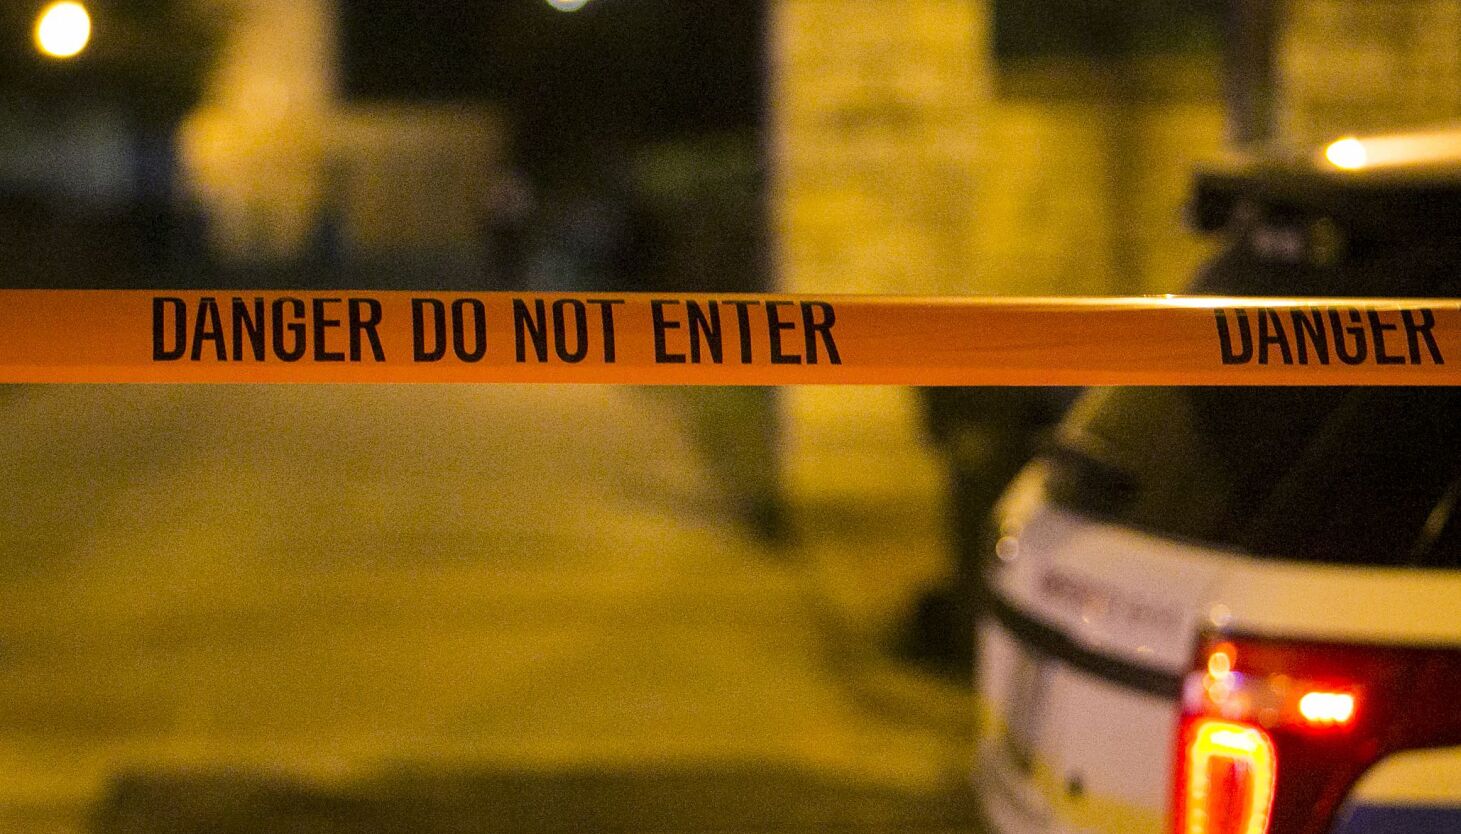 A man was shot dead on the Chicago Lawn